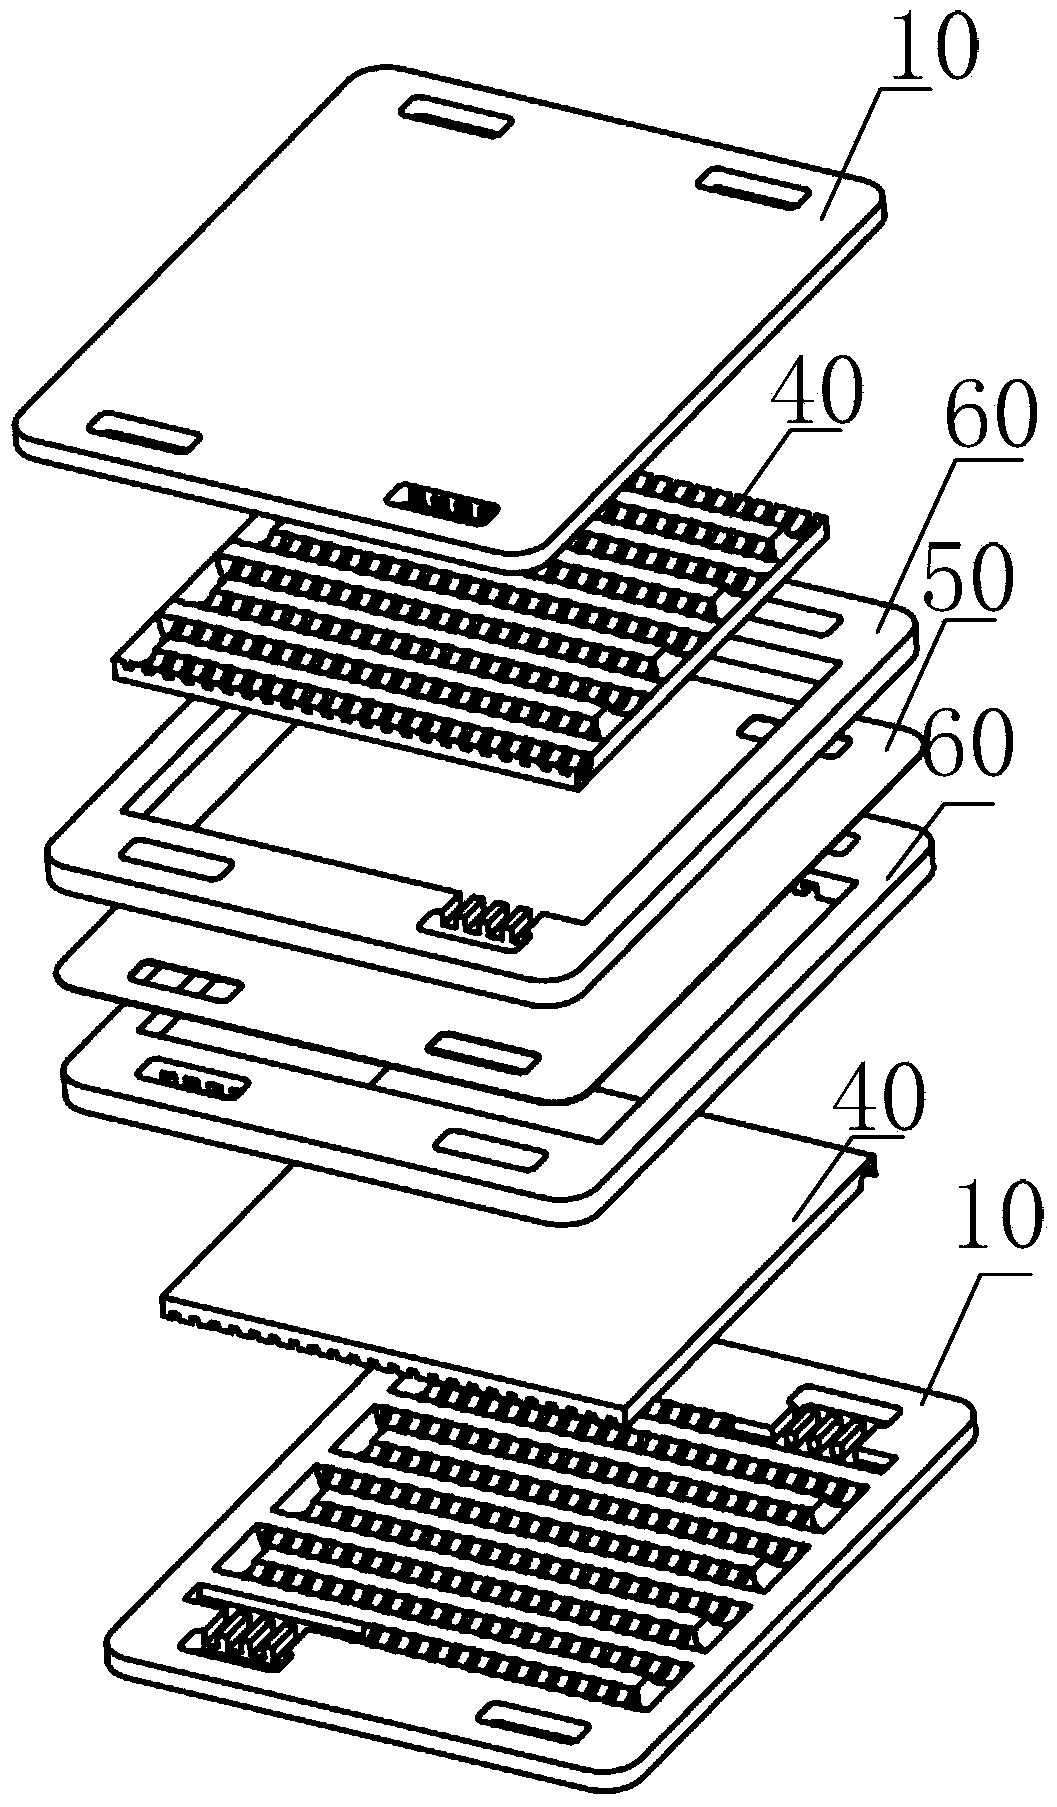 Bipolar plate and flow battery